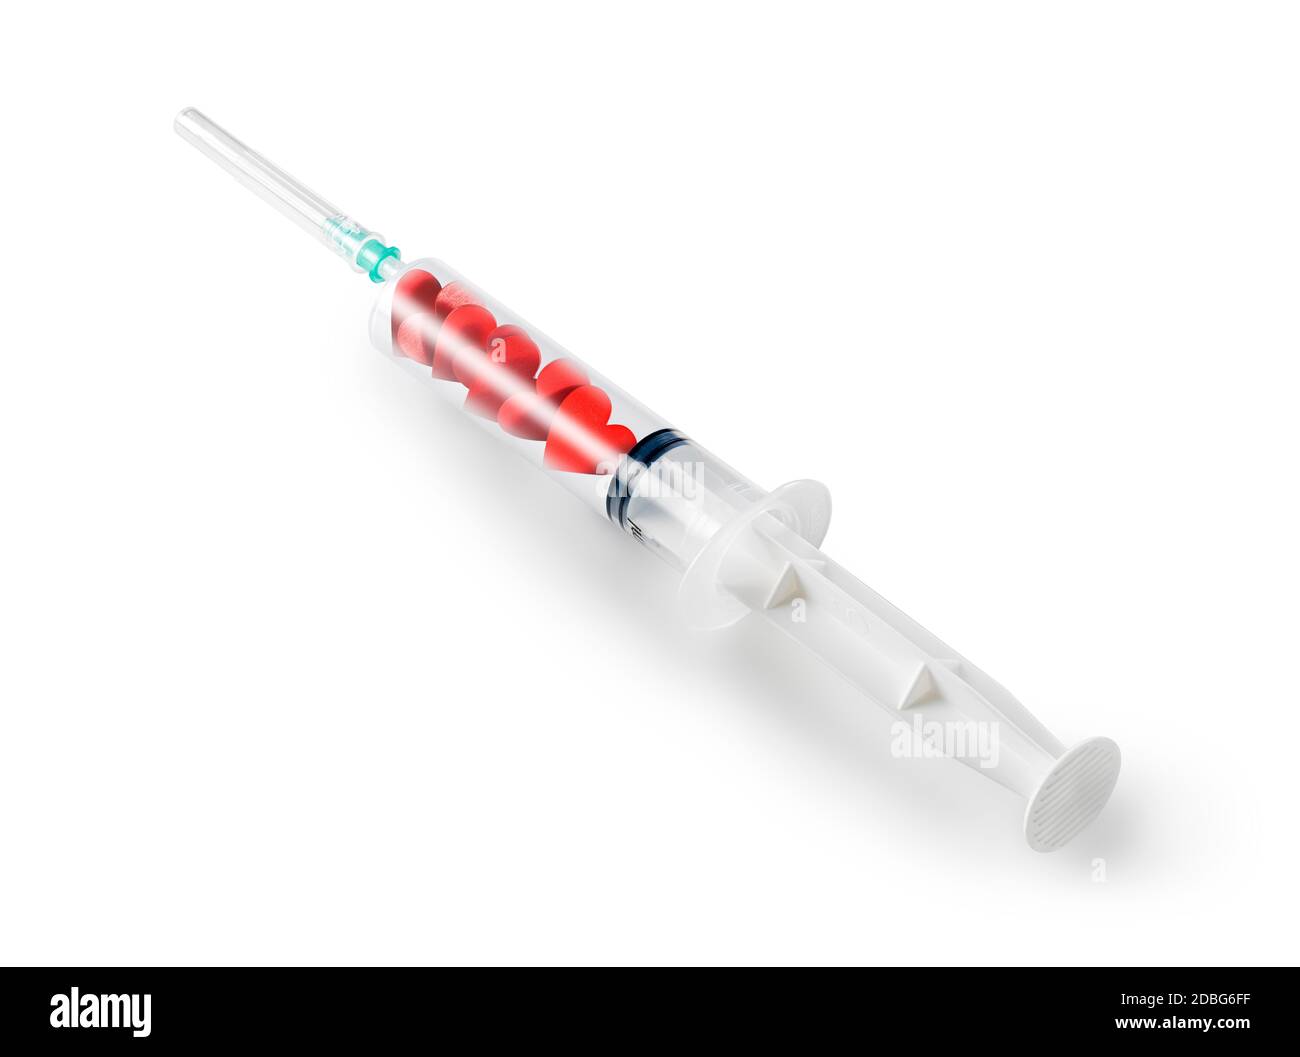 A clear syringe contains small red hearts to inject love as medicine. Stock Photo